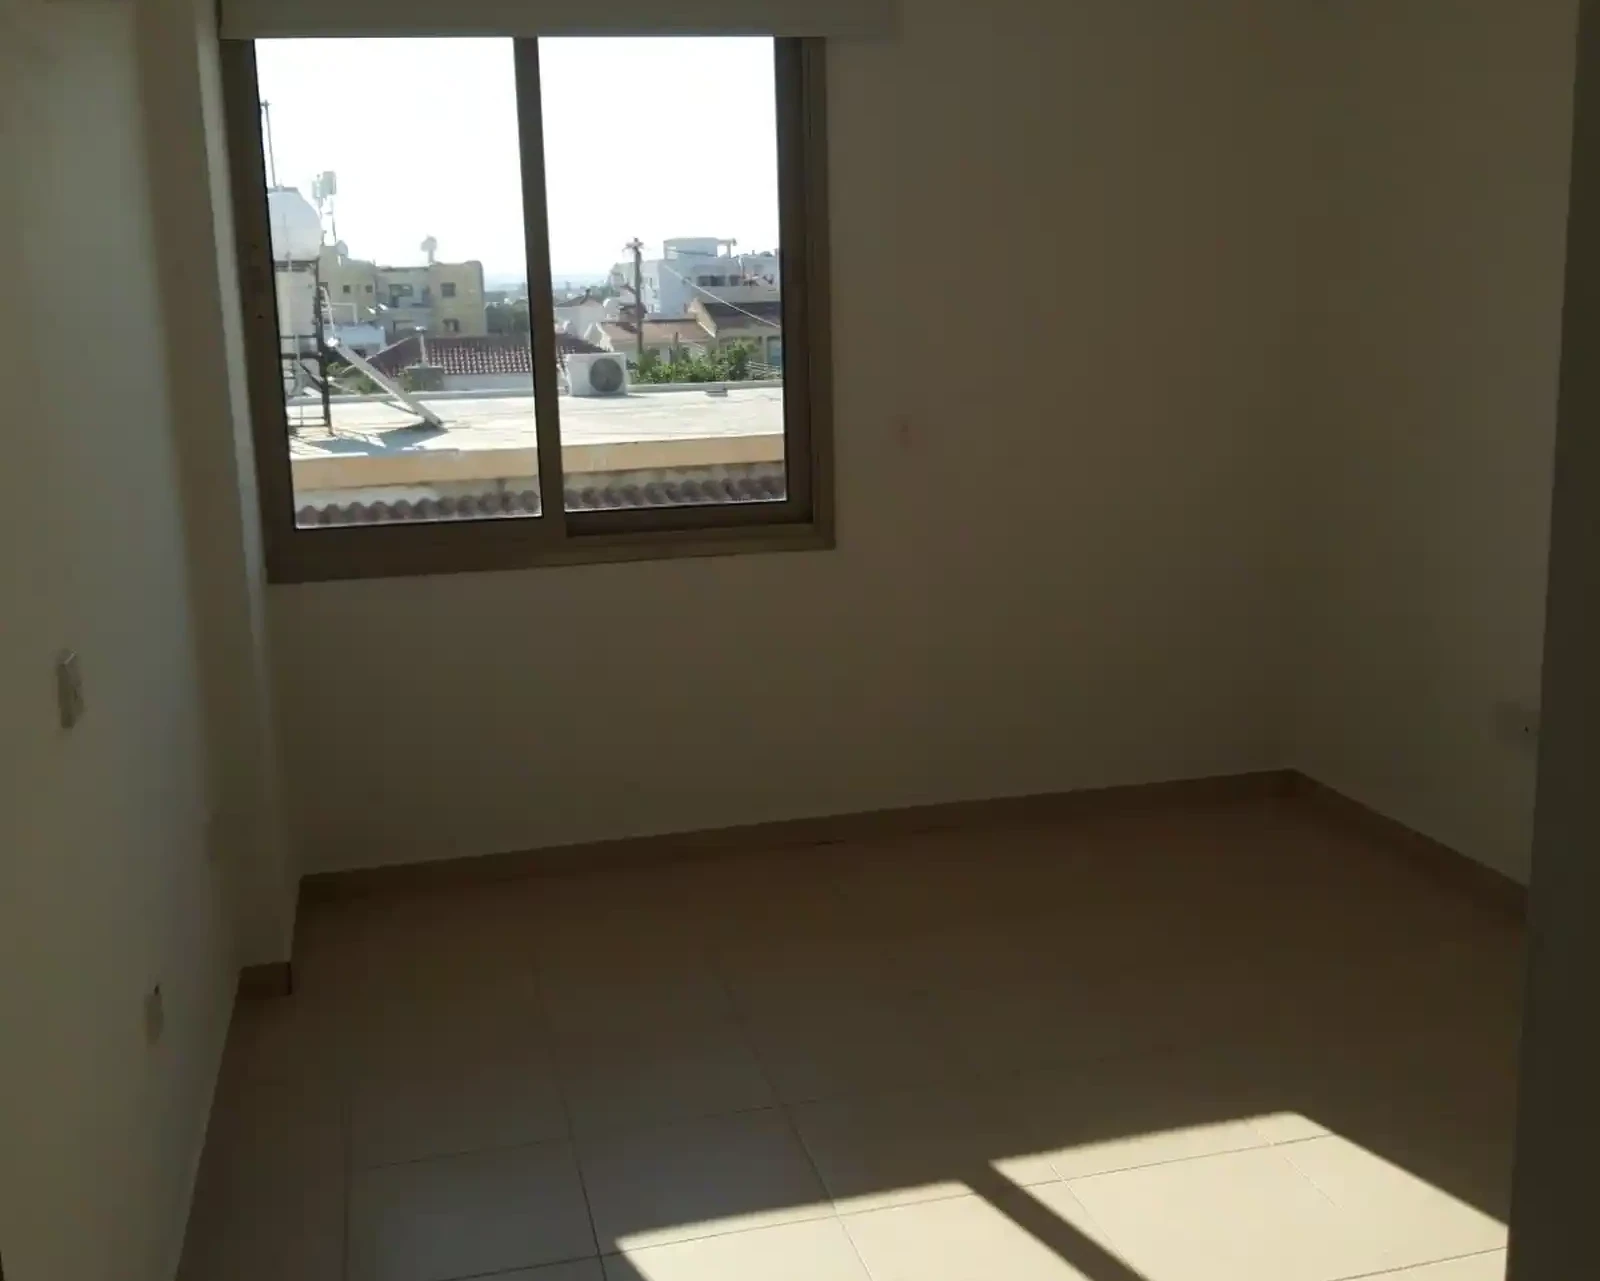 3-bedroom penthouse to rent €1.400, image 1